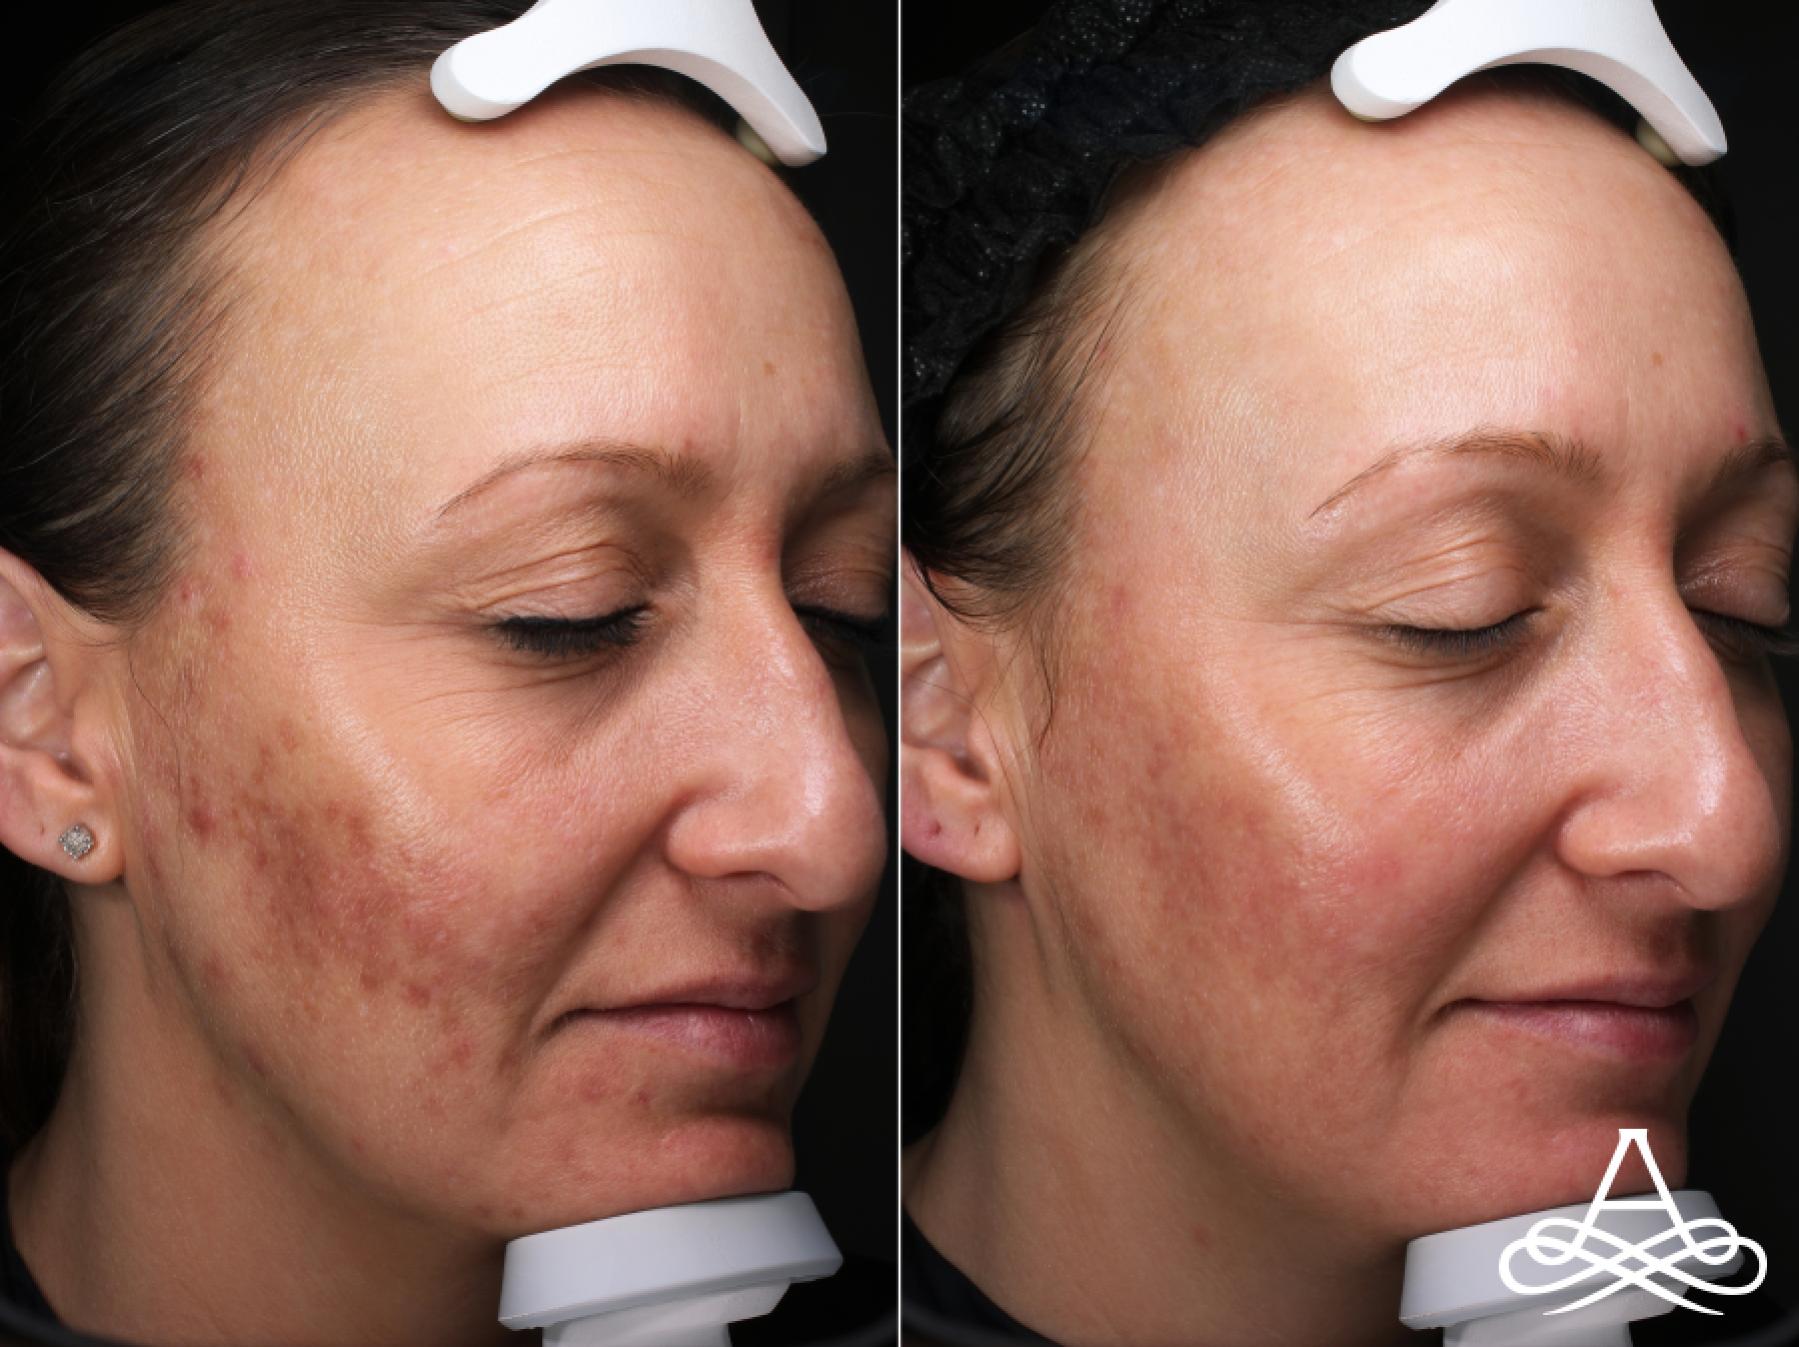 Acne Scars: Patient 1 - Before and After 3